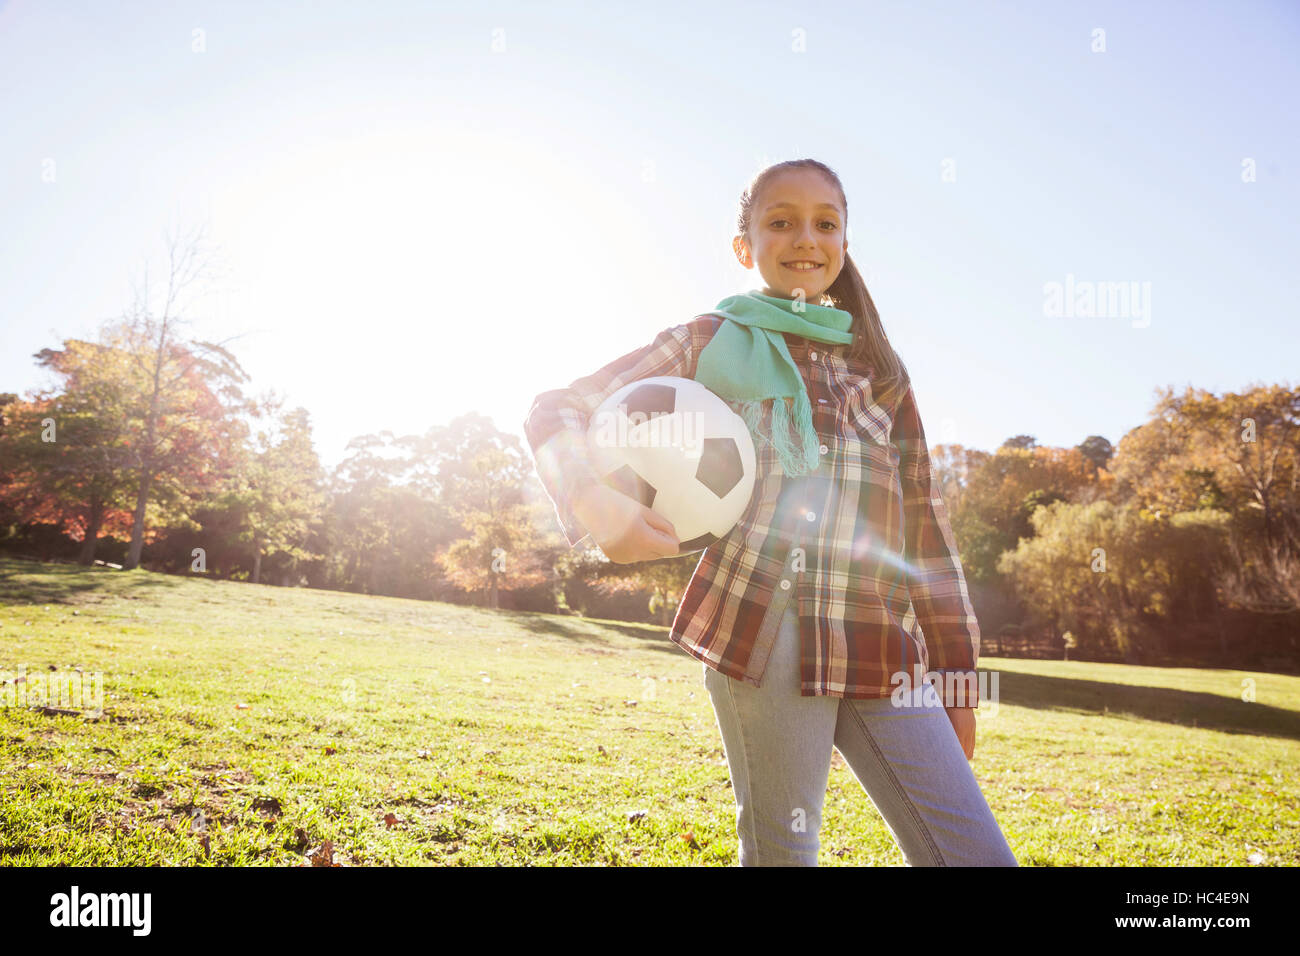 Low angle portrait of smiling girl holding soccer ball in park Stock Photo